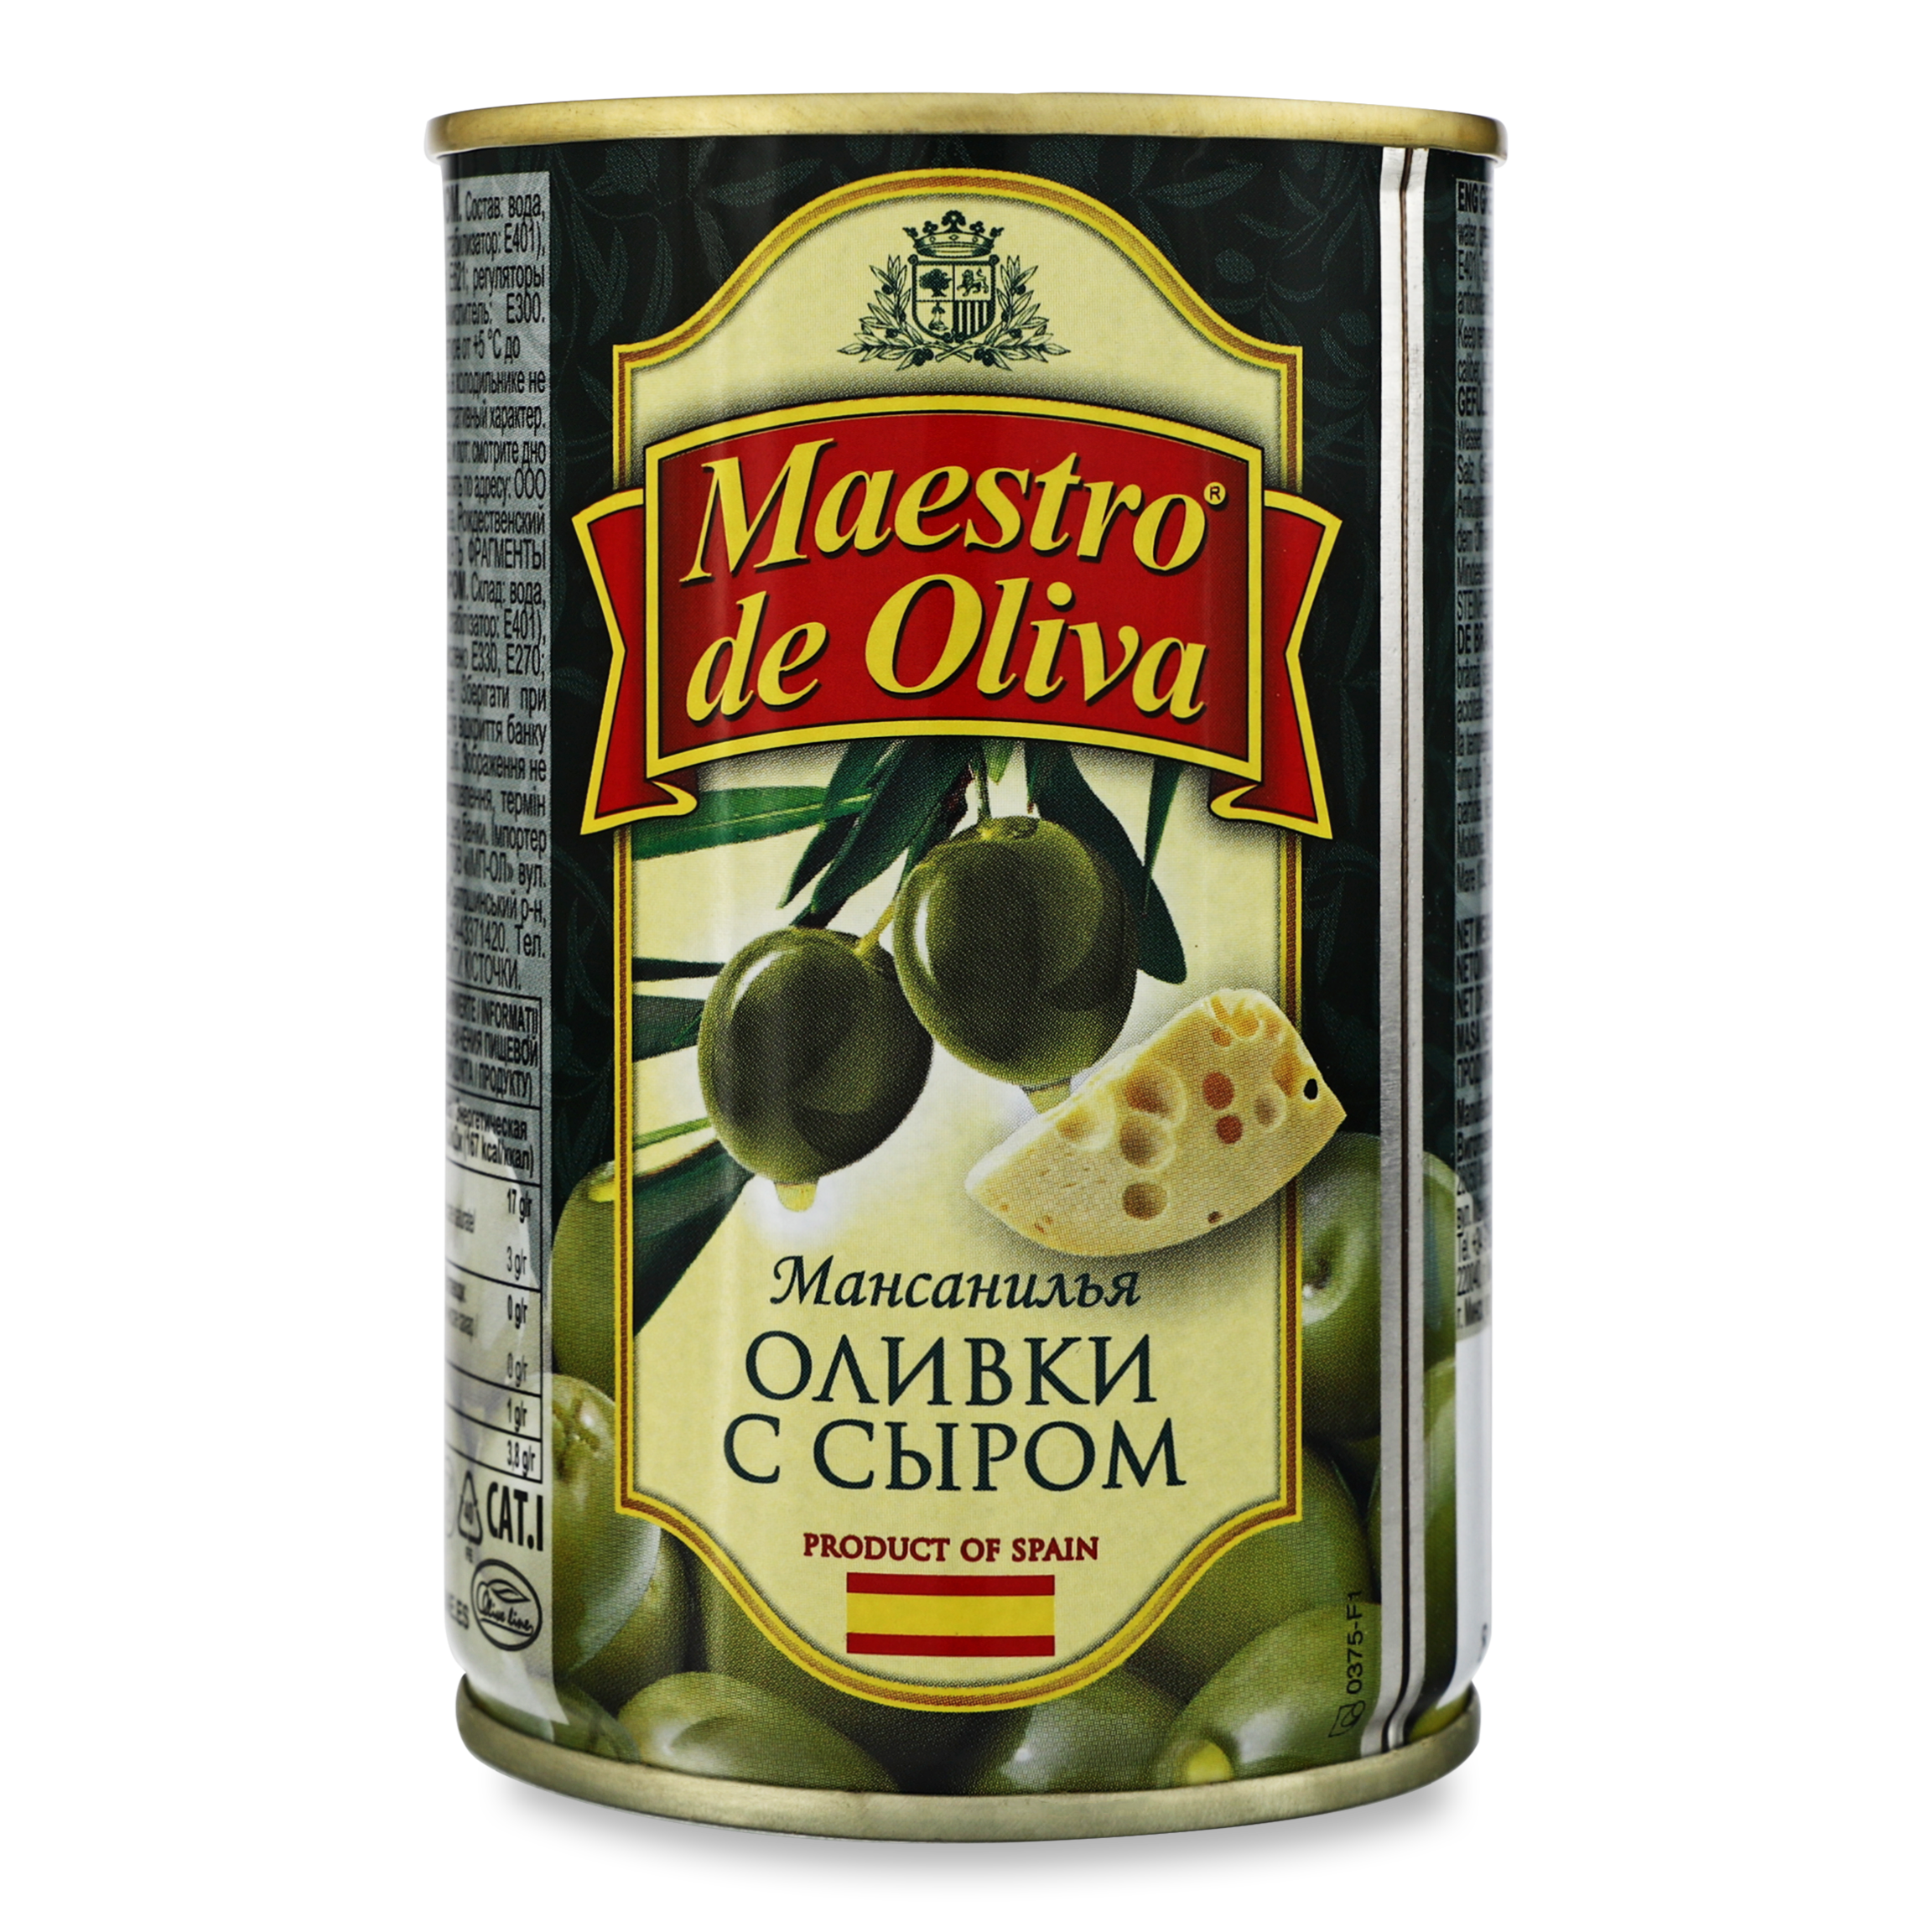 Maestro de Oliva Green Olives with cheese 300ml